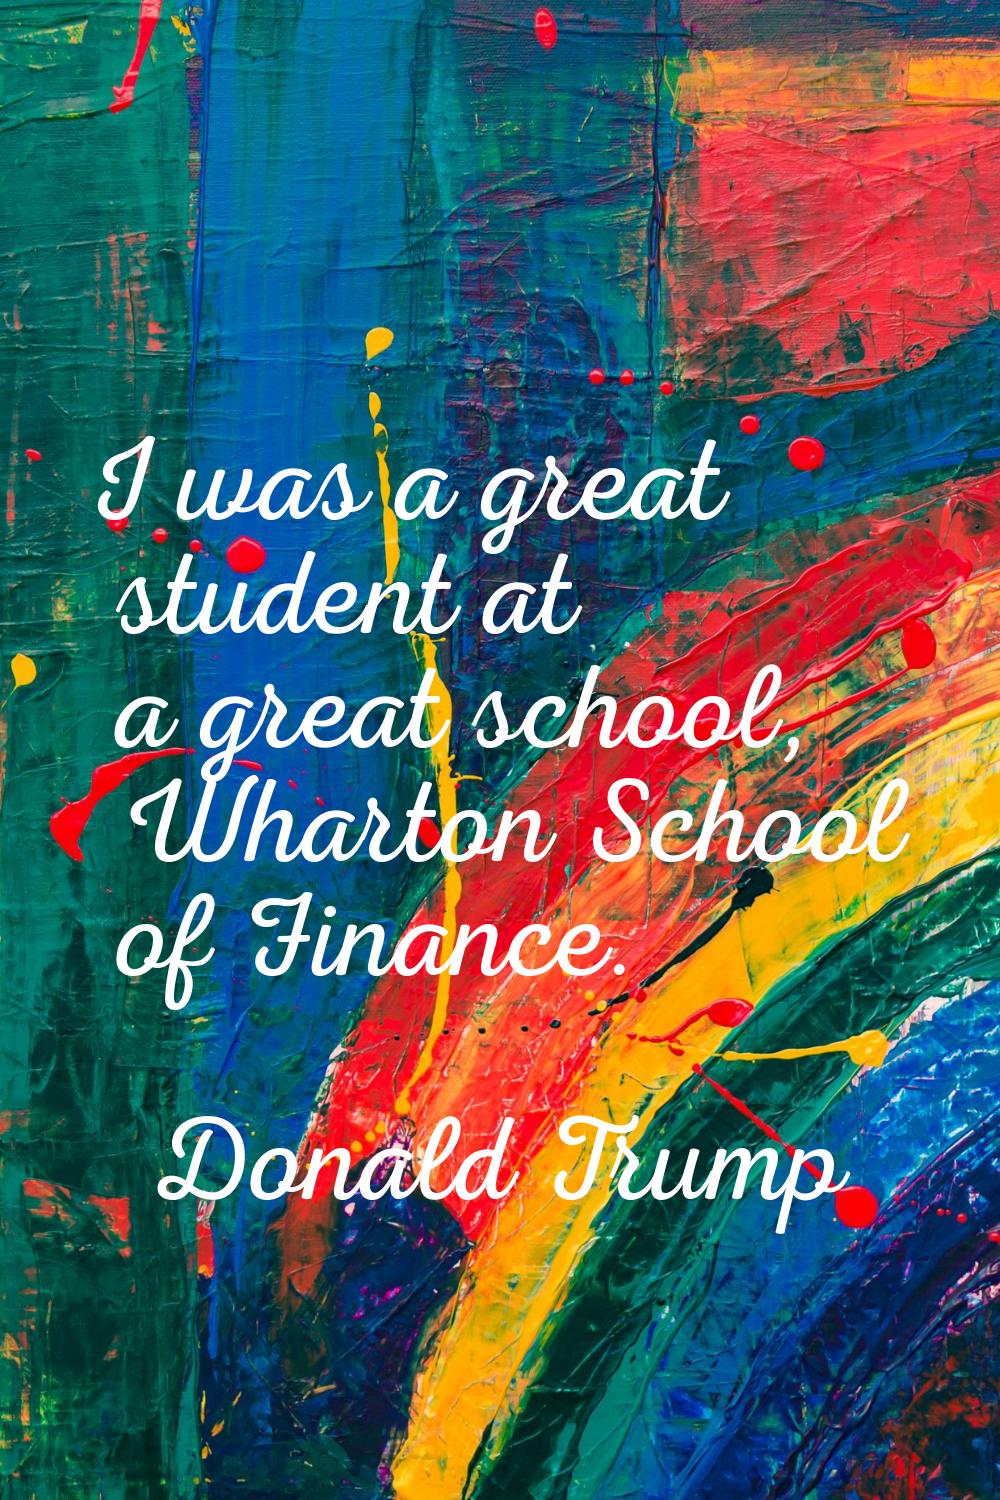 I was a great student at a great school, Wharton School of Finance.